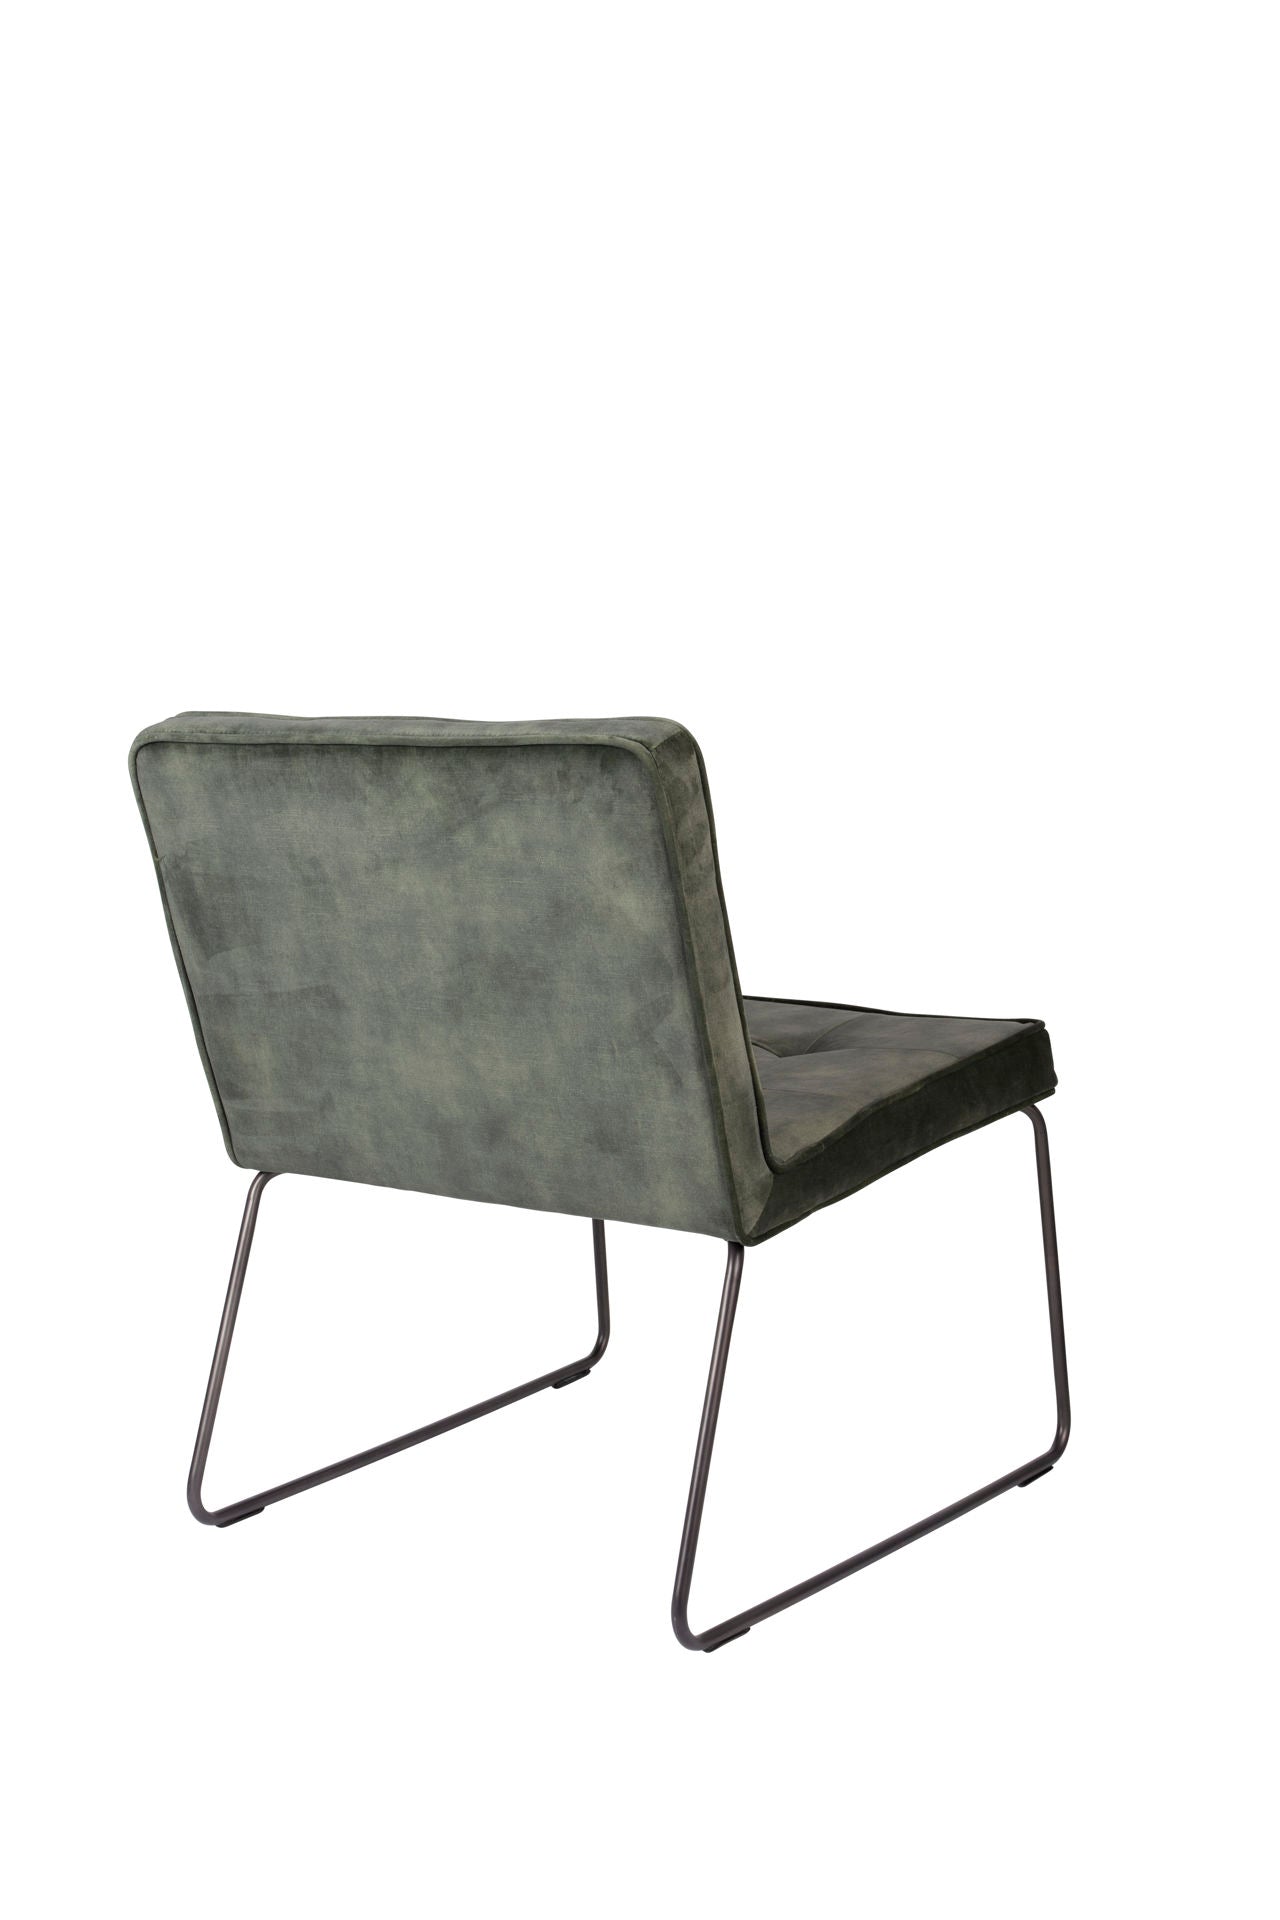 Nancy's Gold Canyon Lounge Chair - Industrial - Green - Polyester, Plywood, Metal - 69 cm x 55.5 cm x 75 cm